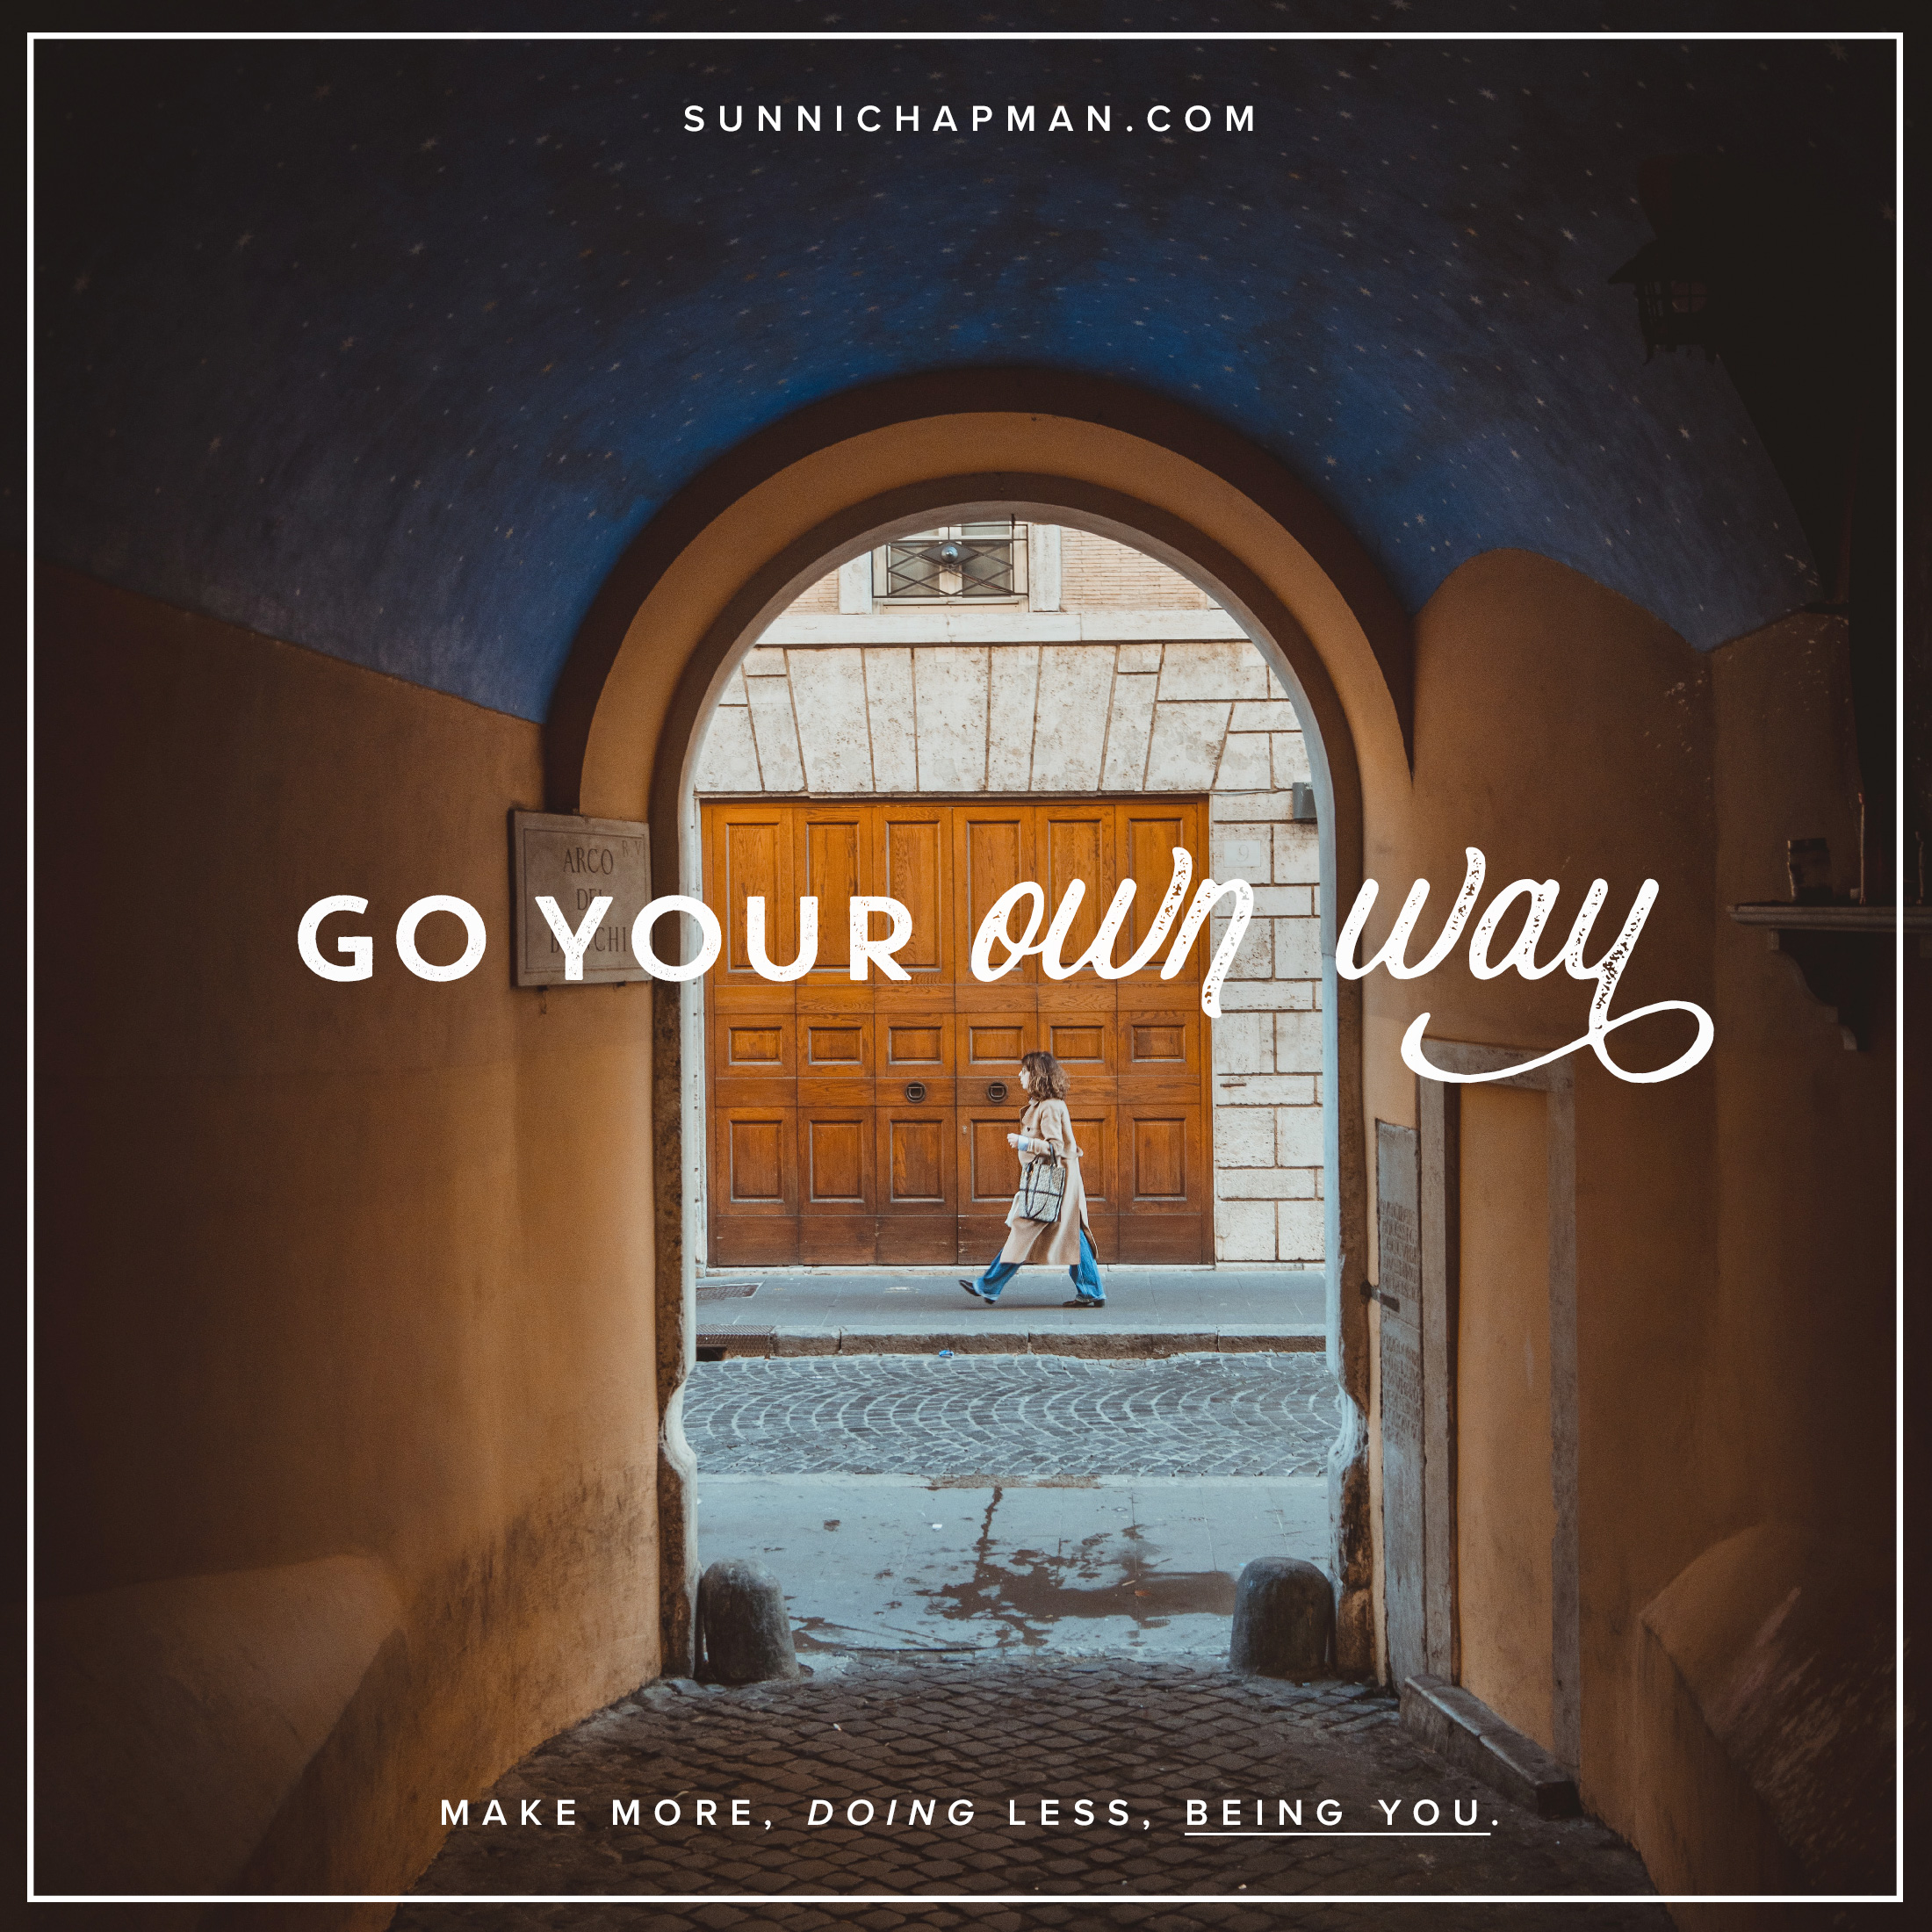 Inspirational image from sunnichapman.com displaying 'Go Your Own Way' in elegant script. A woman walks through a sunlit, arched passageway towards a large wooden door, embodying the message of individuality and personal journey. The surrounding architecture has a warm, historical ambiance, with a cobblestone street completing the serene scene. Below the image, the tagline encourages making more, doing less, and being yourself.